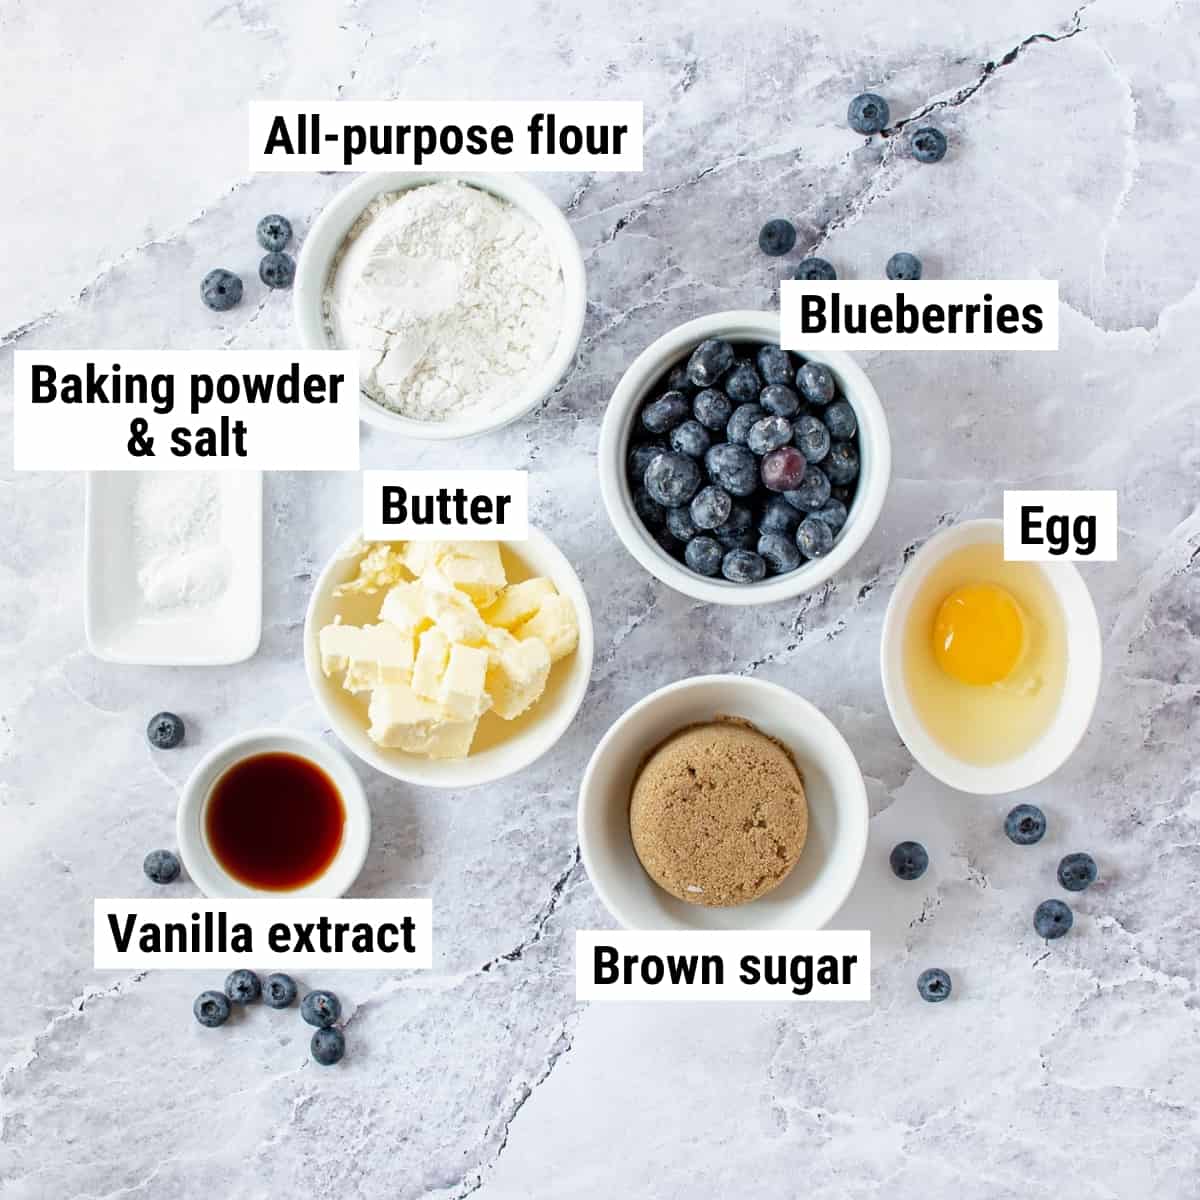 The ingredients used to make blueberry blondies.